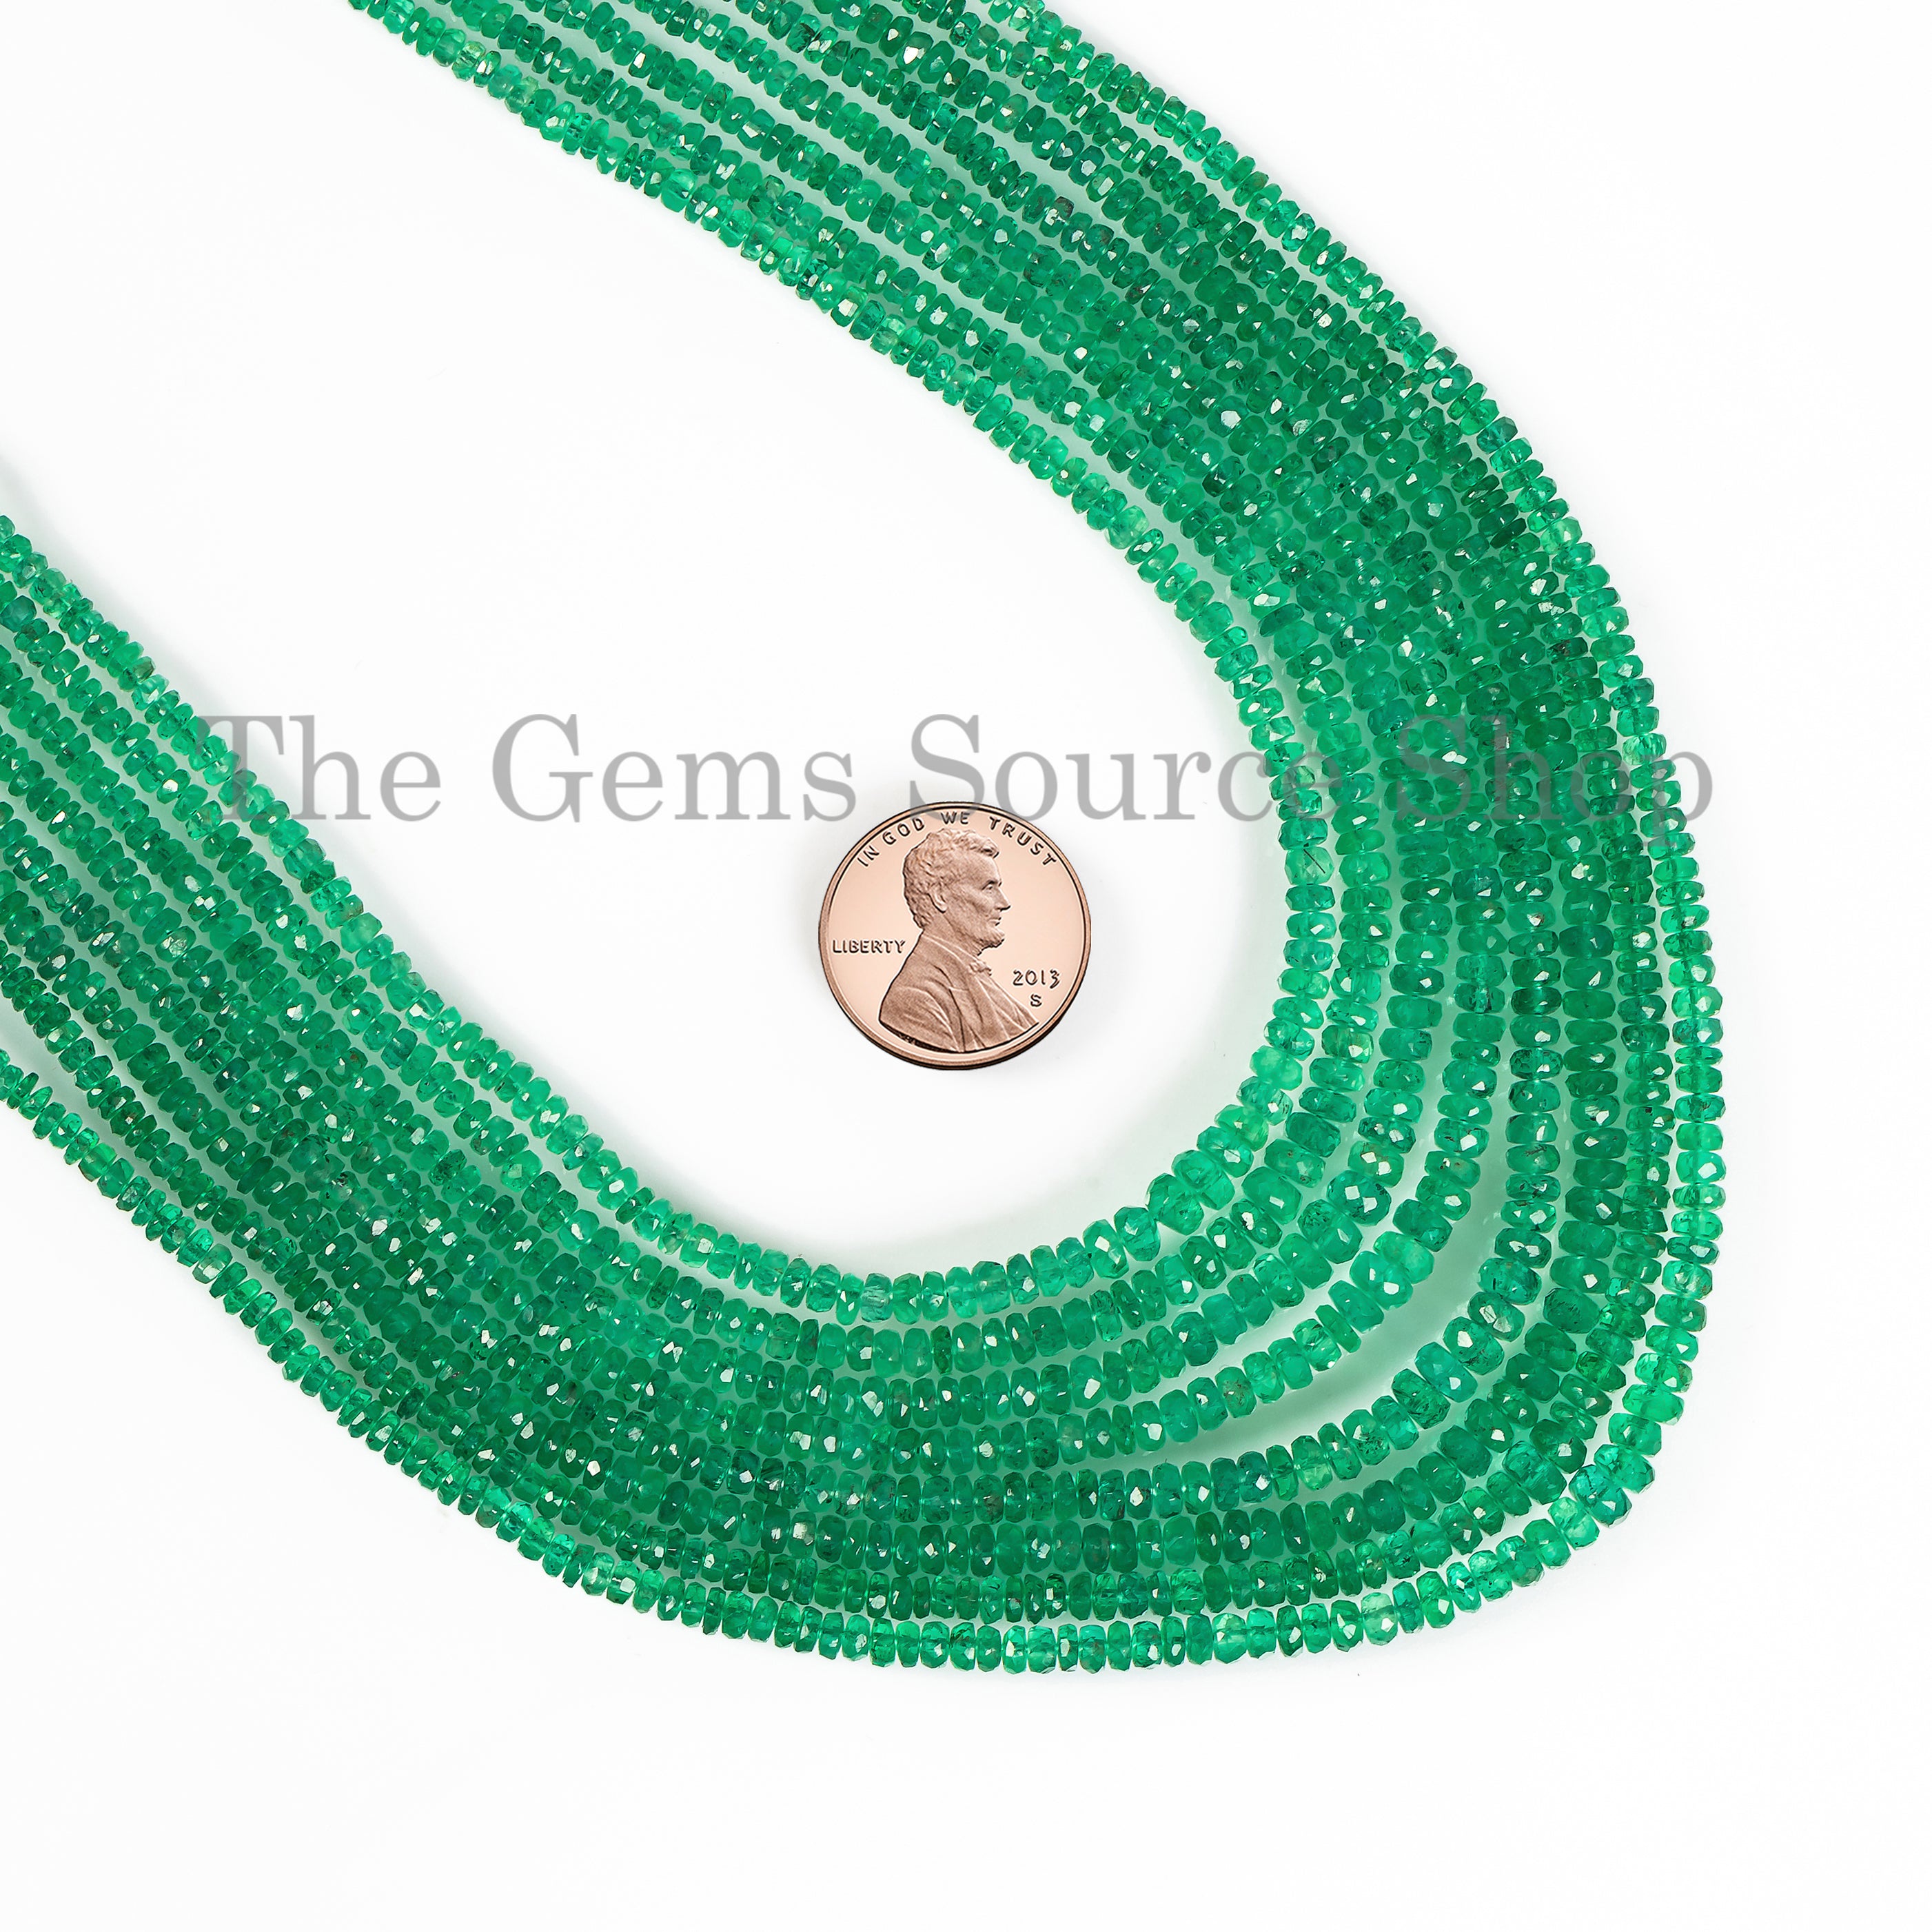 Natural Zambian Emerald Faceted Rondelle Beaded Necklace For Party tgs-4612